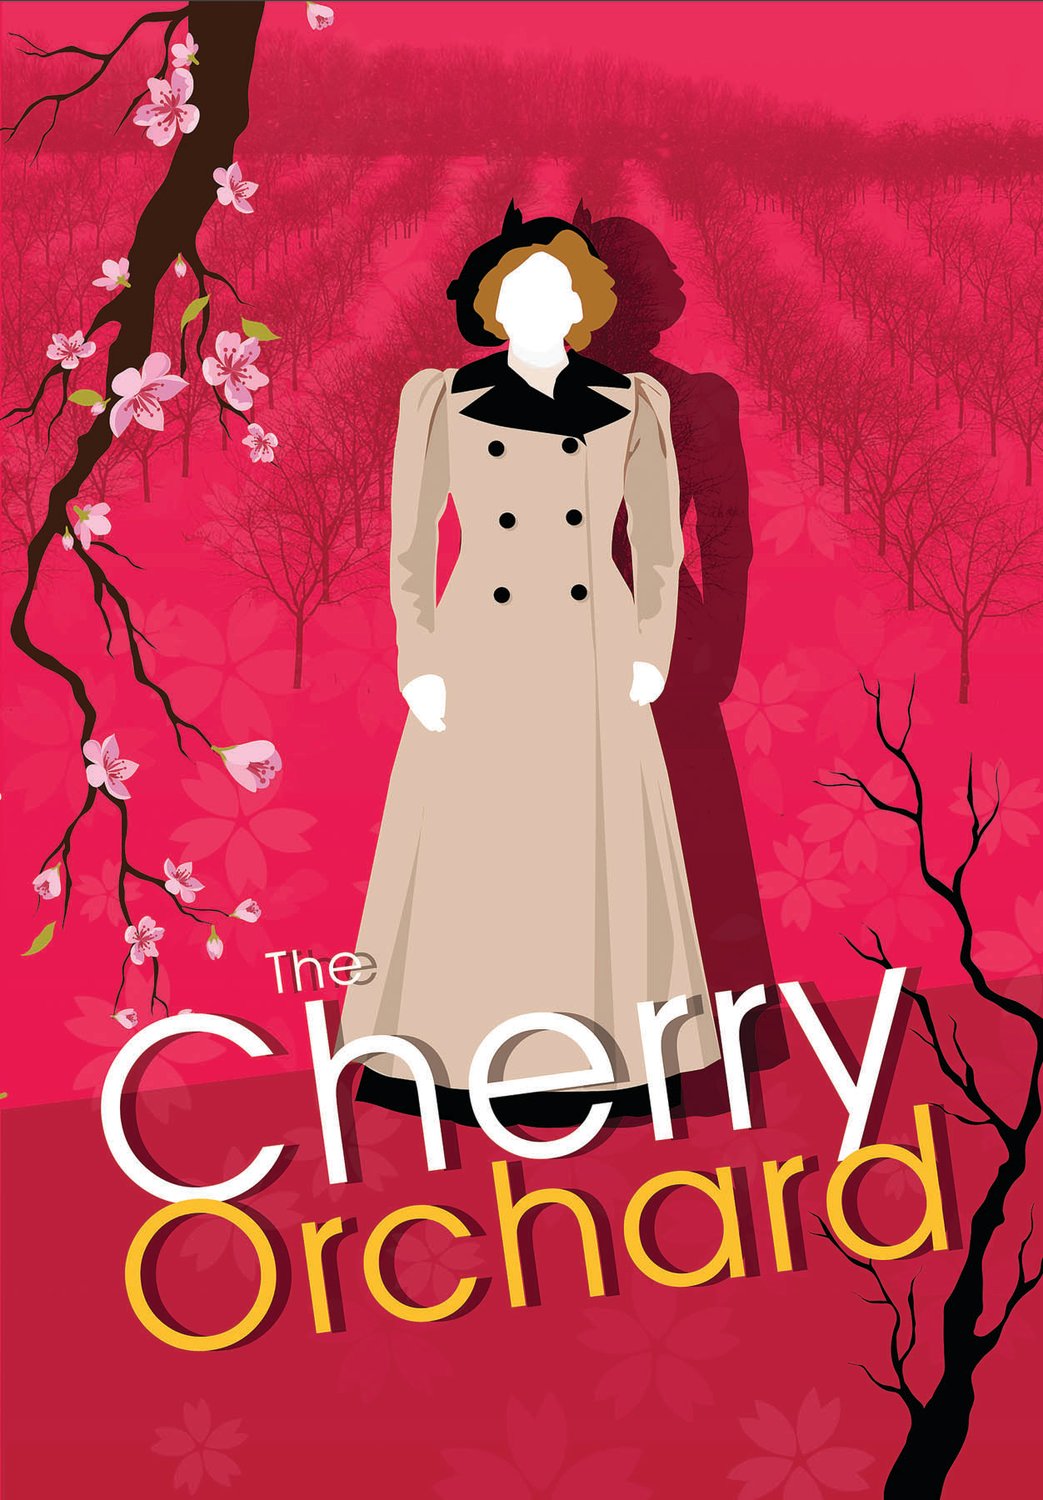 Act 1 Productions at DeSales University presents Anton Chekhov’s “The Cherry Orchard” Feb. 20 to March 3.